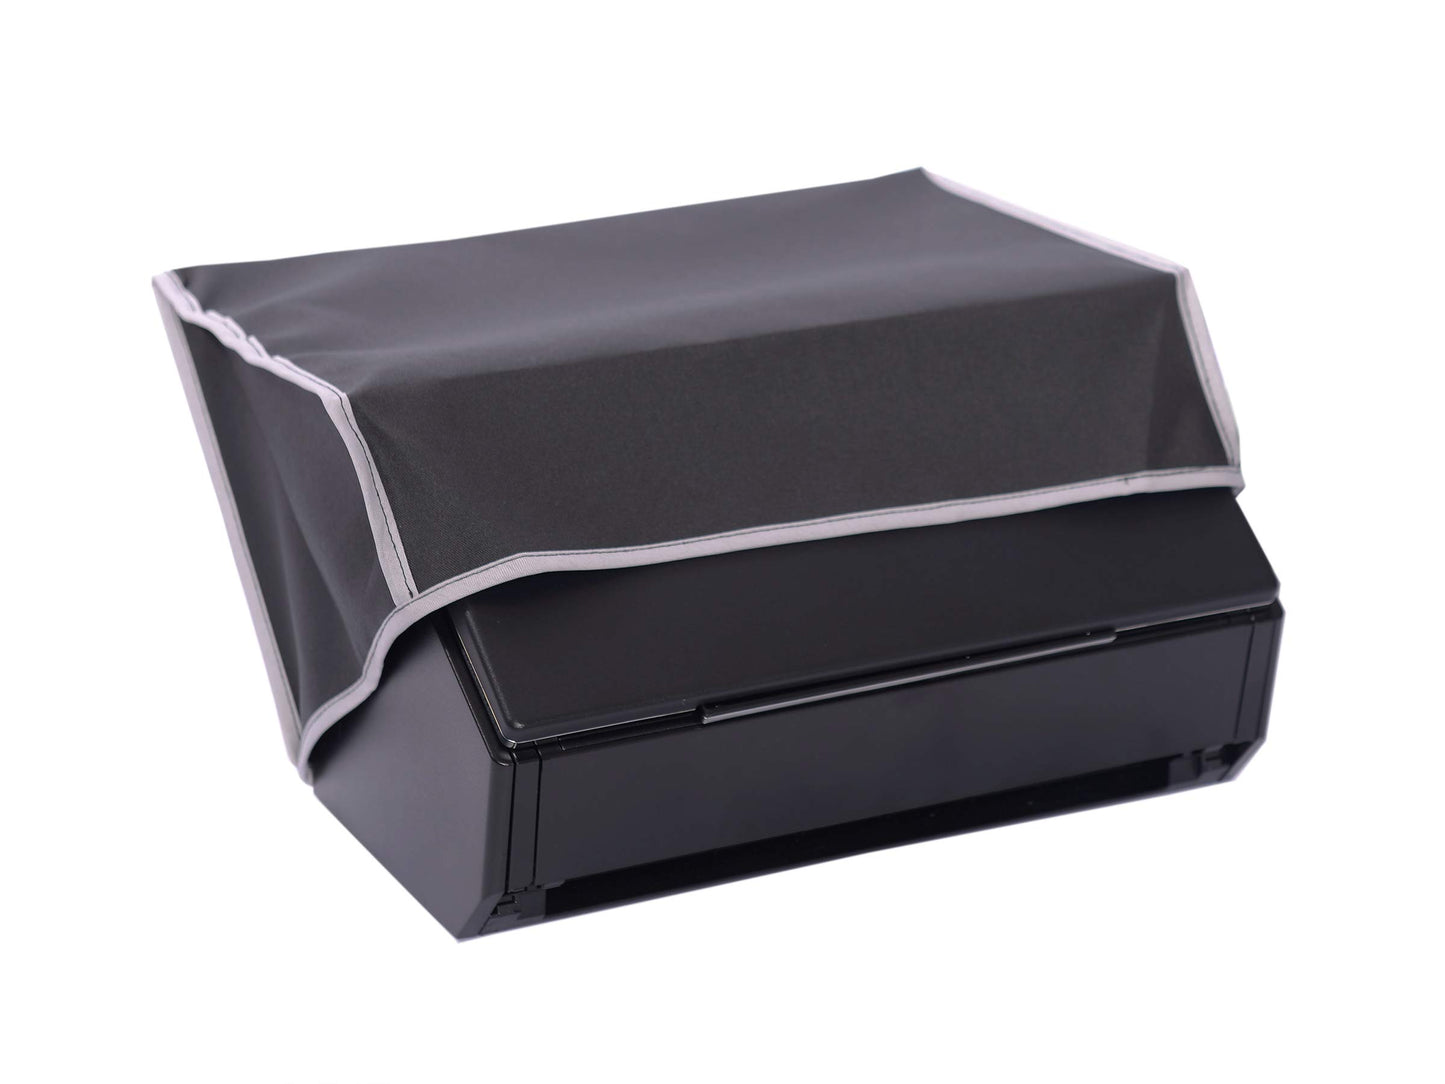 The Perfect Dust Cover, Black Nylon Cover for Epson FastFoto FF-680W, Workforce ES-400 and Workforce ES-500W Scanners, Anti Static, Waterproof Cover by The Perfect Dust Cover LLC